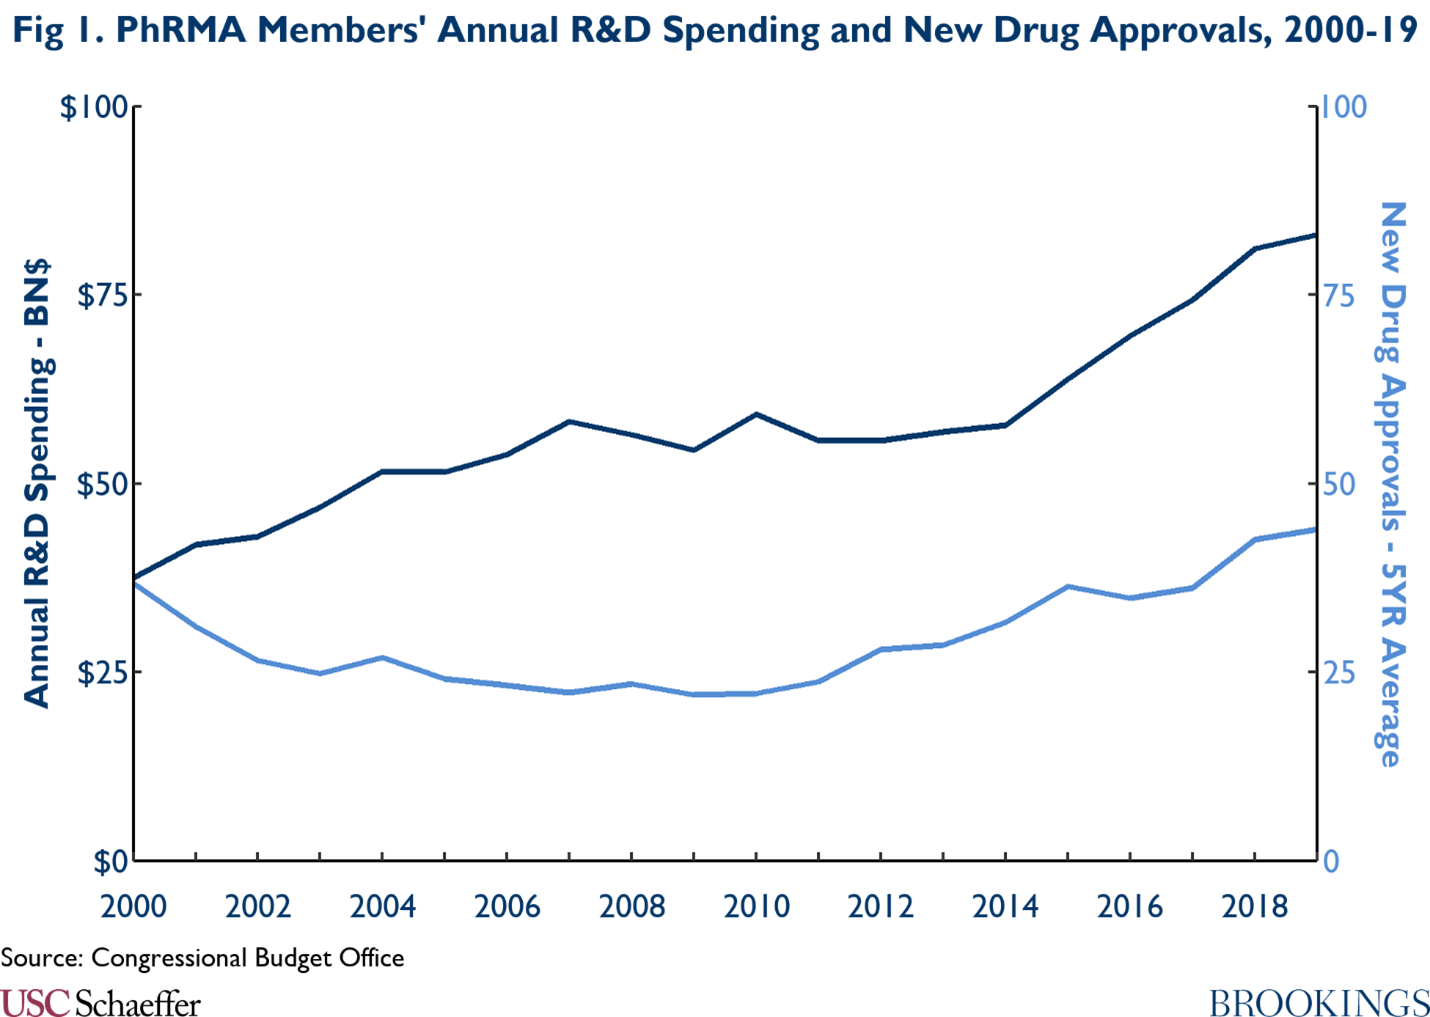 PhRMA Members' Annual R&D Spending and New Drug Approvals, 2000-19